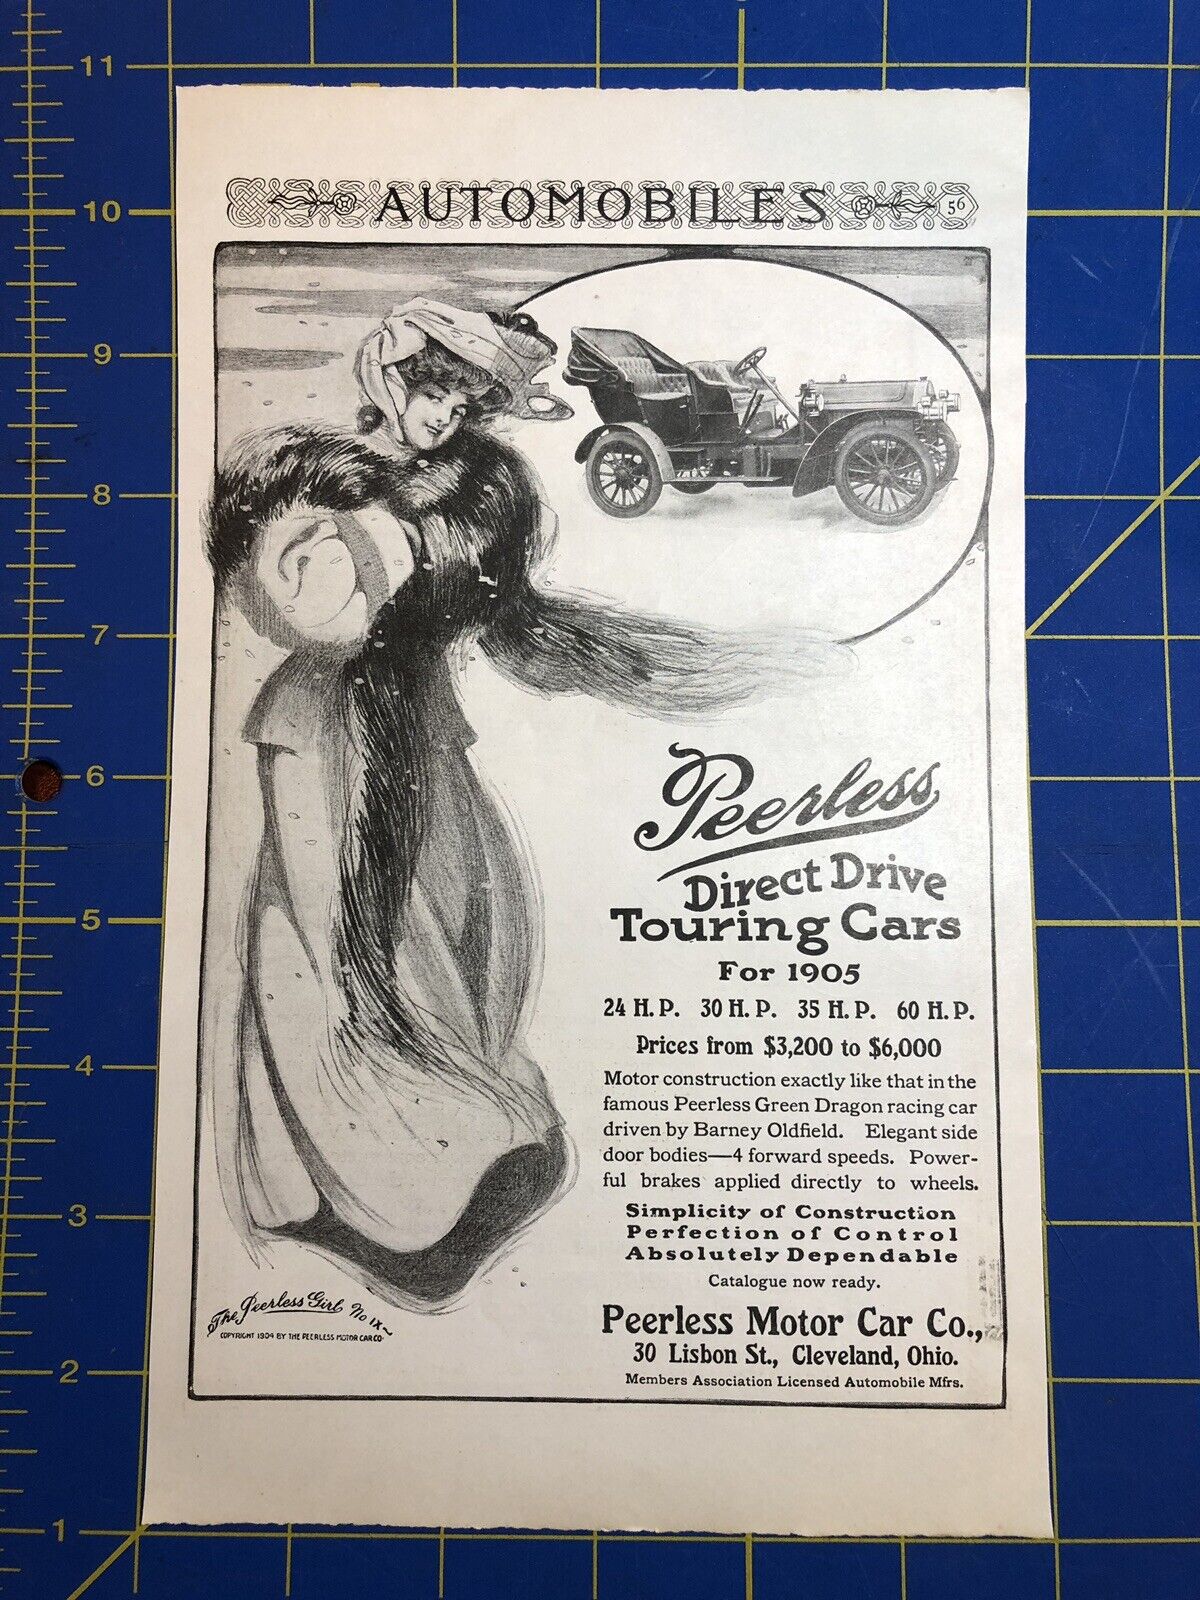 1905 Original Vintage Print Ad for Peerless Direct Drive Touring Cars 